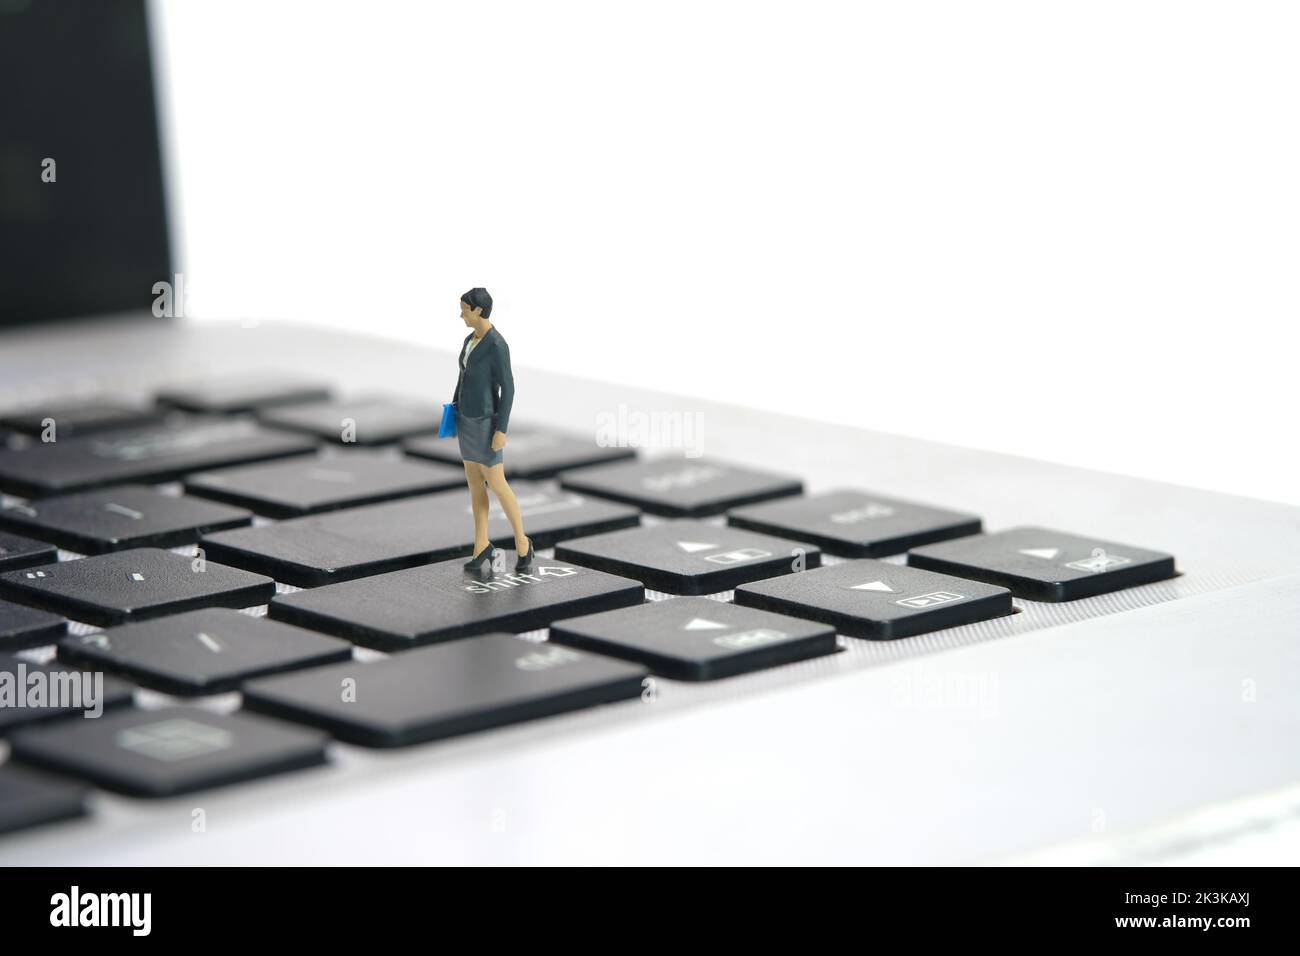 Miniature people toy figure photography. A businesswoman standing above notebook laptop keyboard. Isolated on white background. Image photo Stock Photo